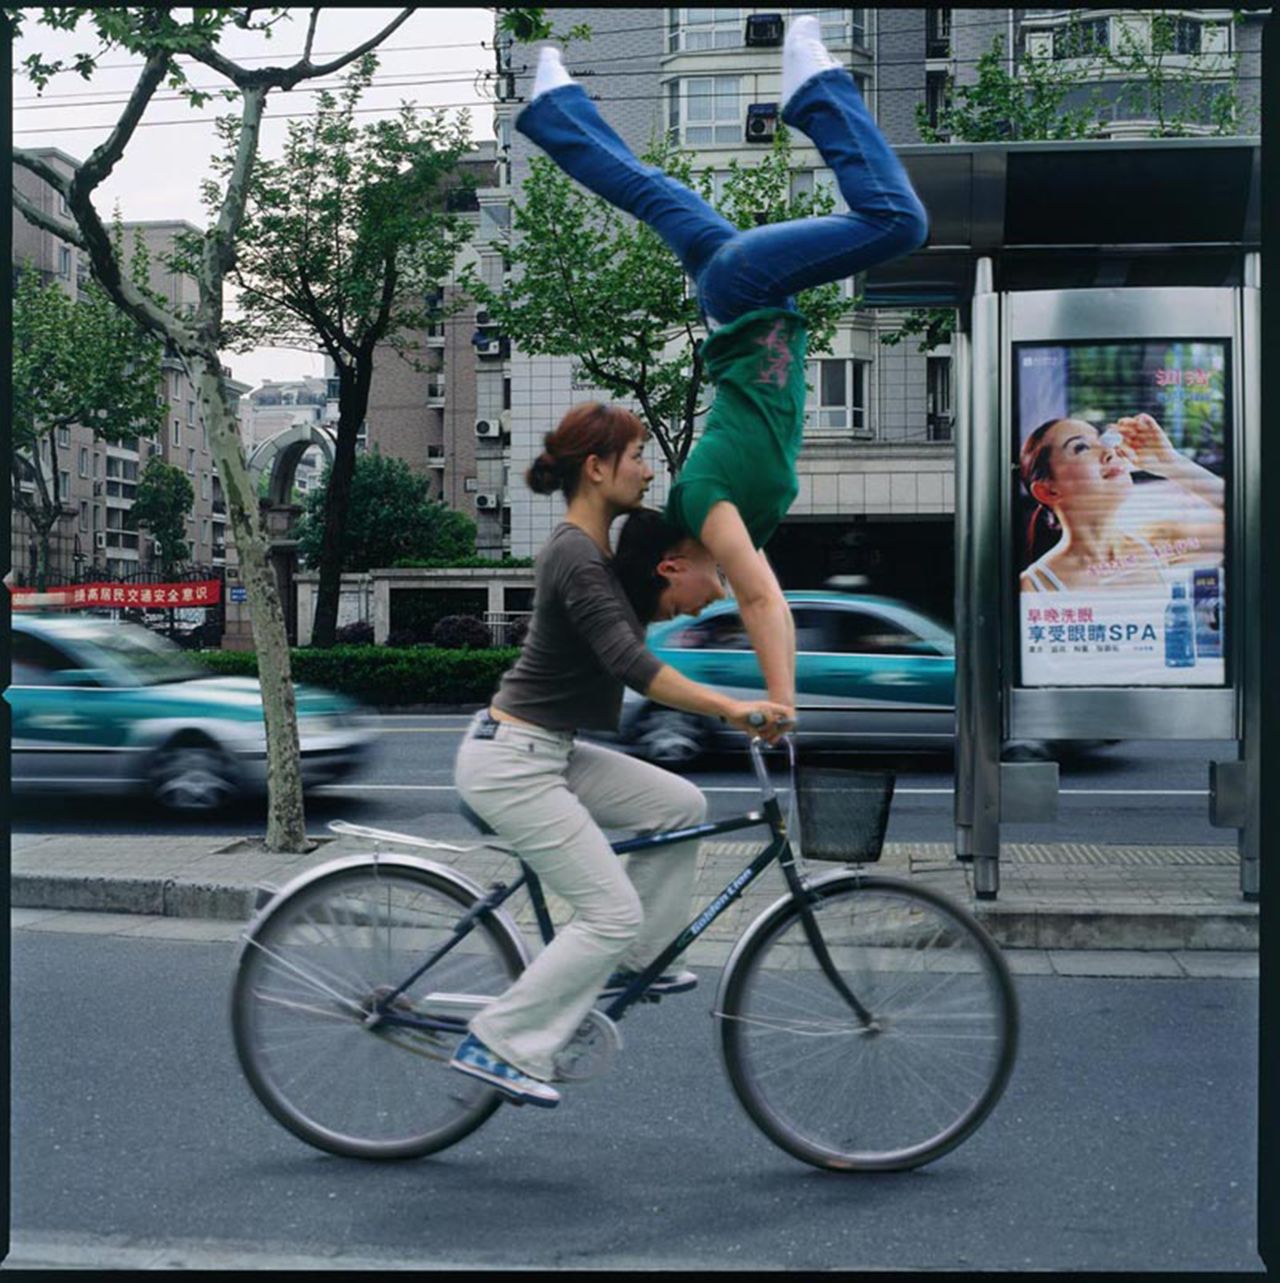 "Cycle Aerobics" (2005) by Yang Zhenzhong. The photograph is reminiscent of the cycling images that the photographer had originally showed at the shuttered 1999 gallery, "Wushirenfei."